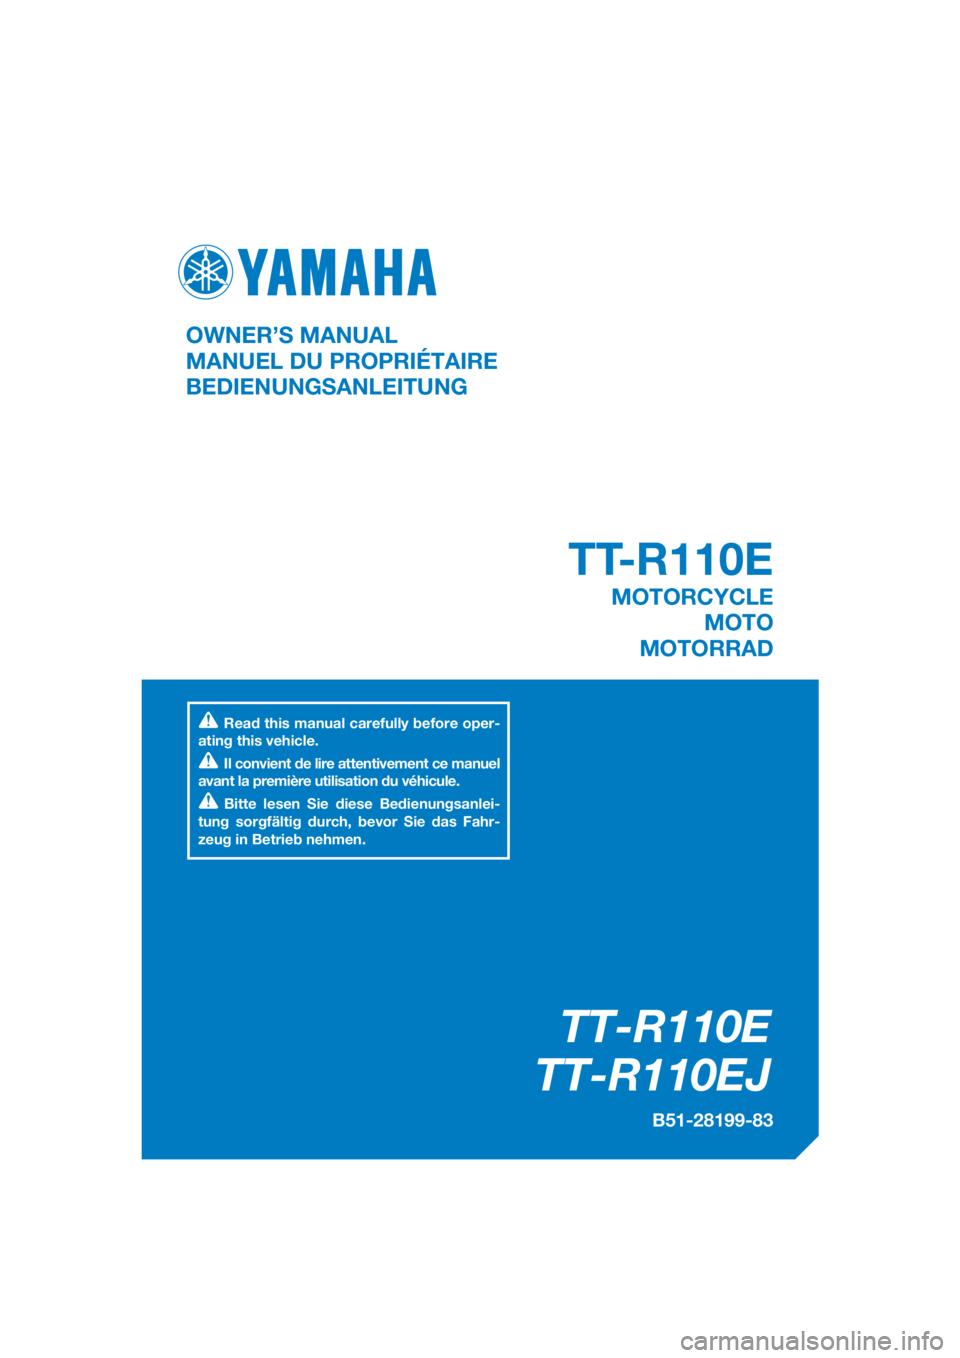 YAMAHA TT-R110E 2018  Notices Demploi (in French) DIC183
TT-R110E
TT-R110EJ
B51-28199-83
OWNER’S MANUAL
MANUEL DU PROPRIÉTAIRE
BEDIENUNGSANLEITUNG
Read this manual carefully before oper-
ating this vehicle.
Il convient de lire attentivement ce man